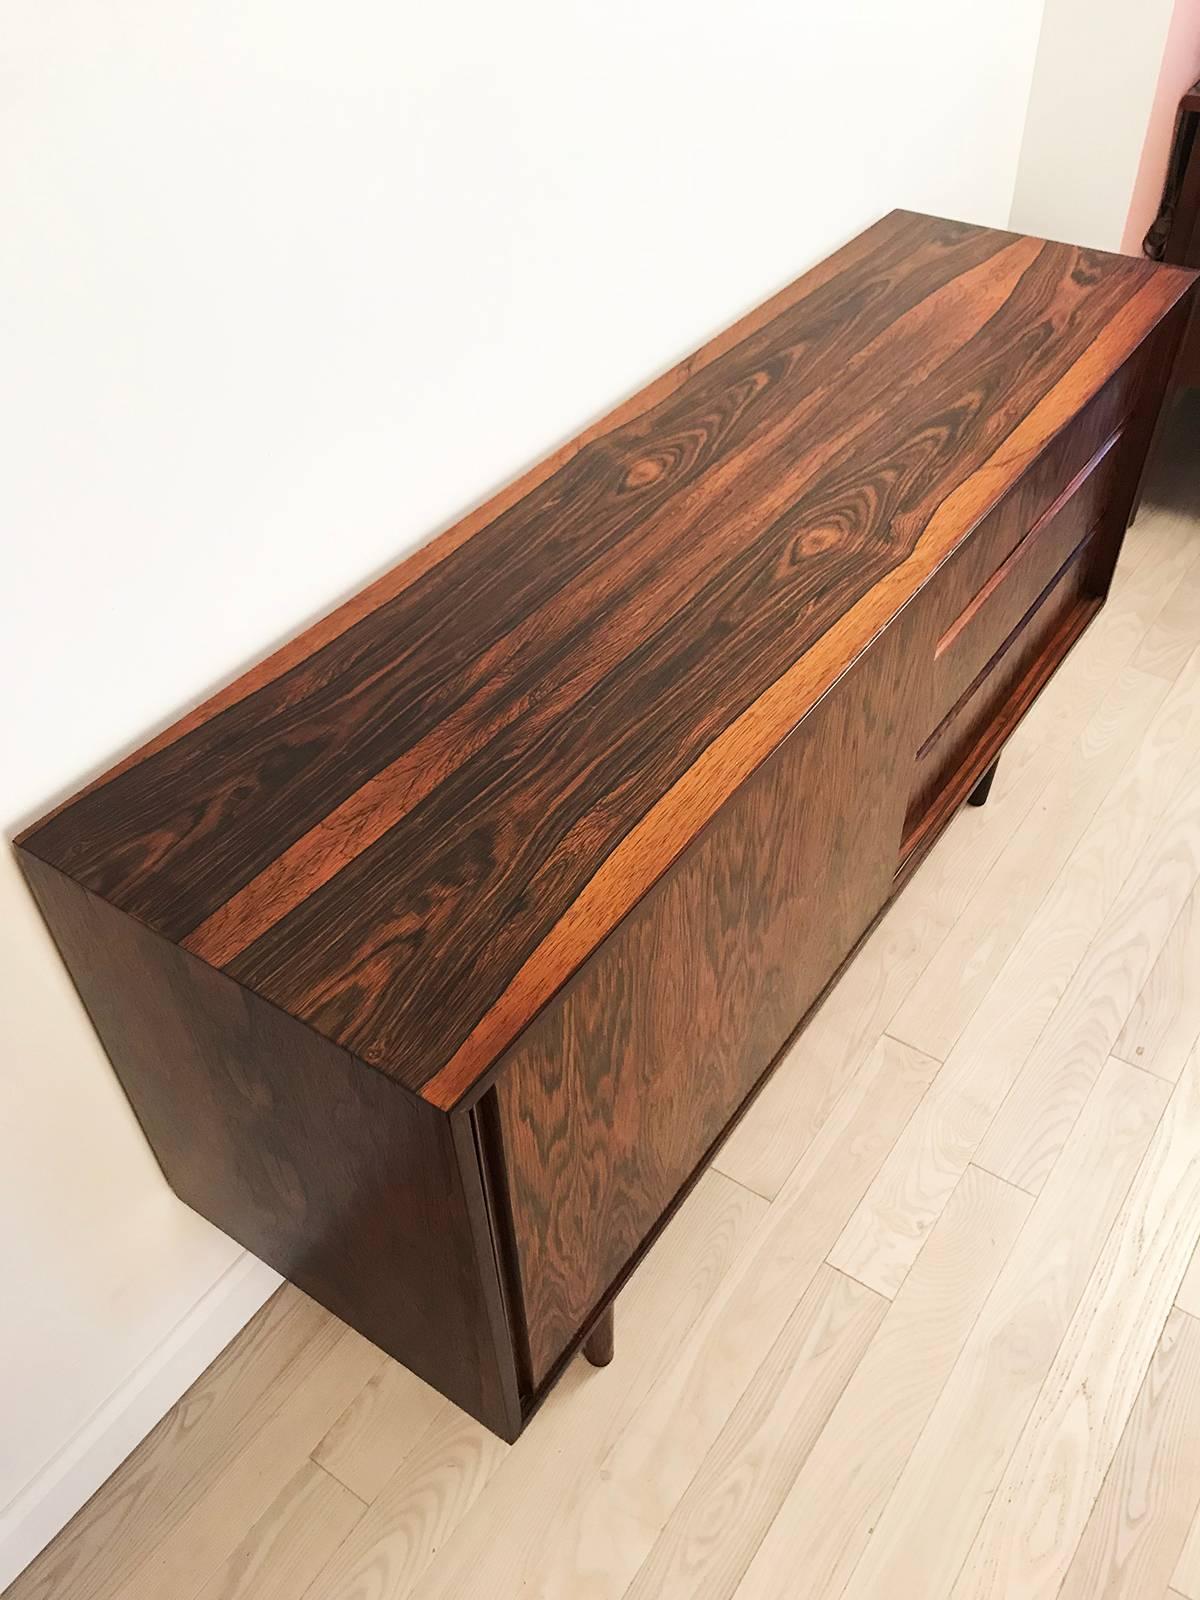 Super cute and petite rosewood server. Made in Denmark by Steens. Three drawers and one sliding cabinet with shelve inside. Pretty rosewood turned peg legs. The rosewood has a very pretty grain. Excellent condition with one chunk out of the veneer